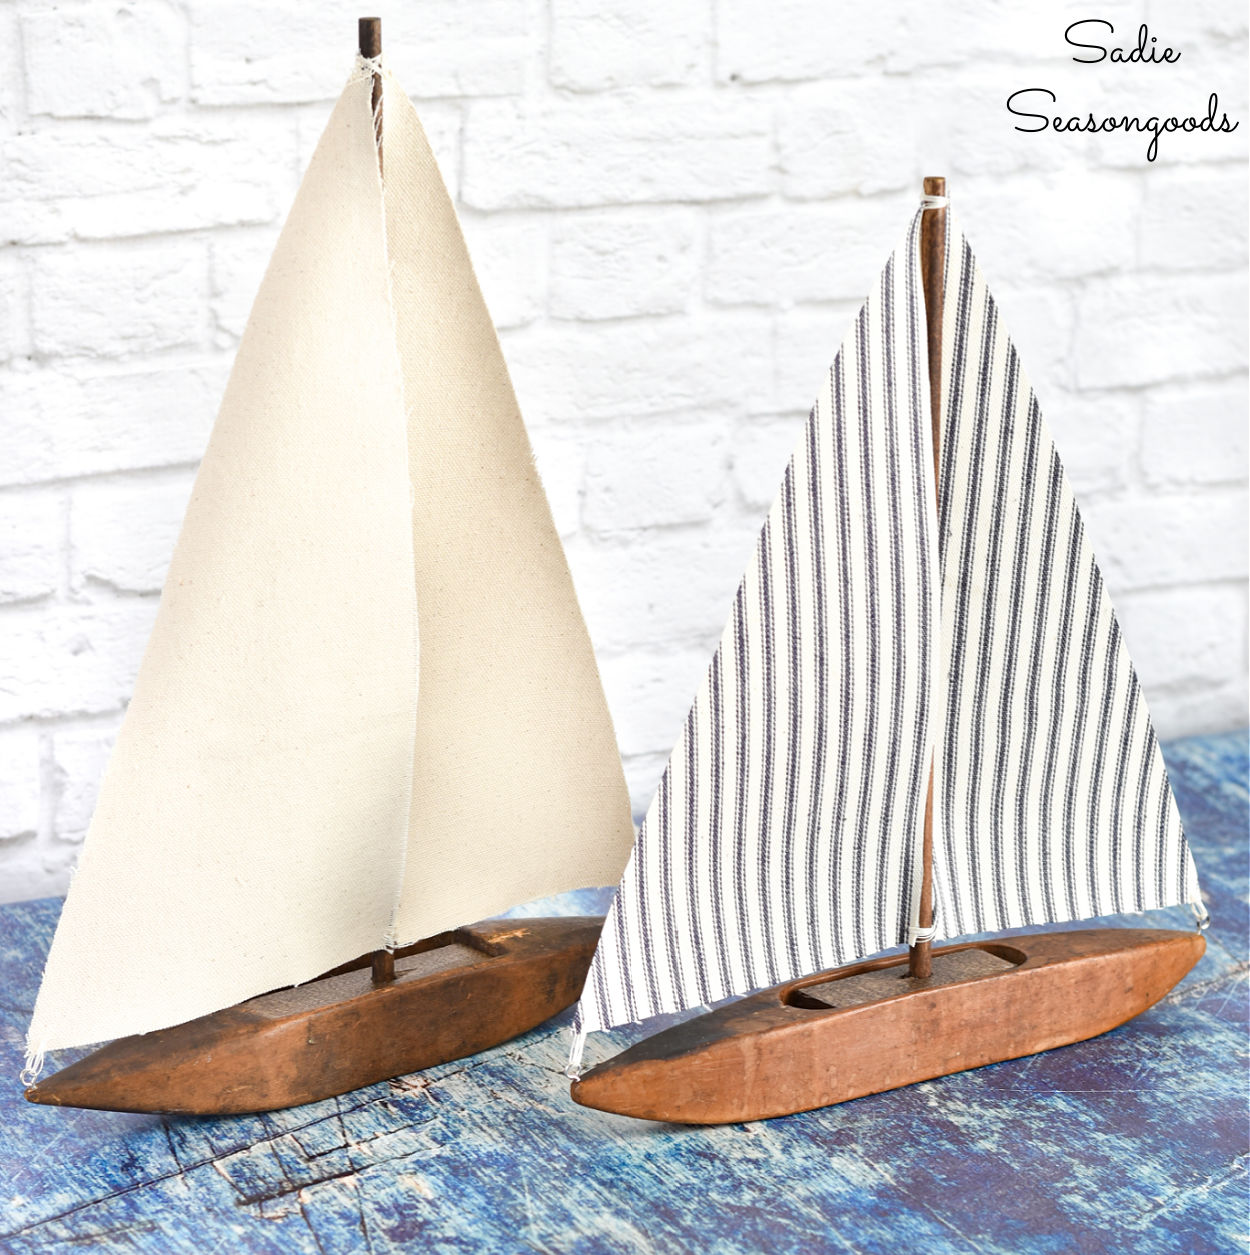 Sailboat Decor from a Weaving Shuttle for Rustic Nautical Decor